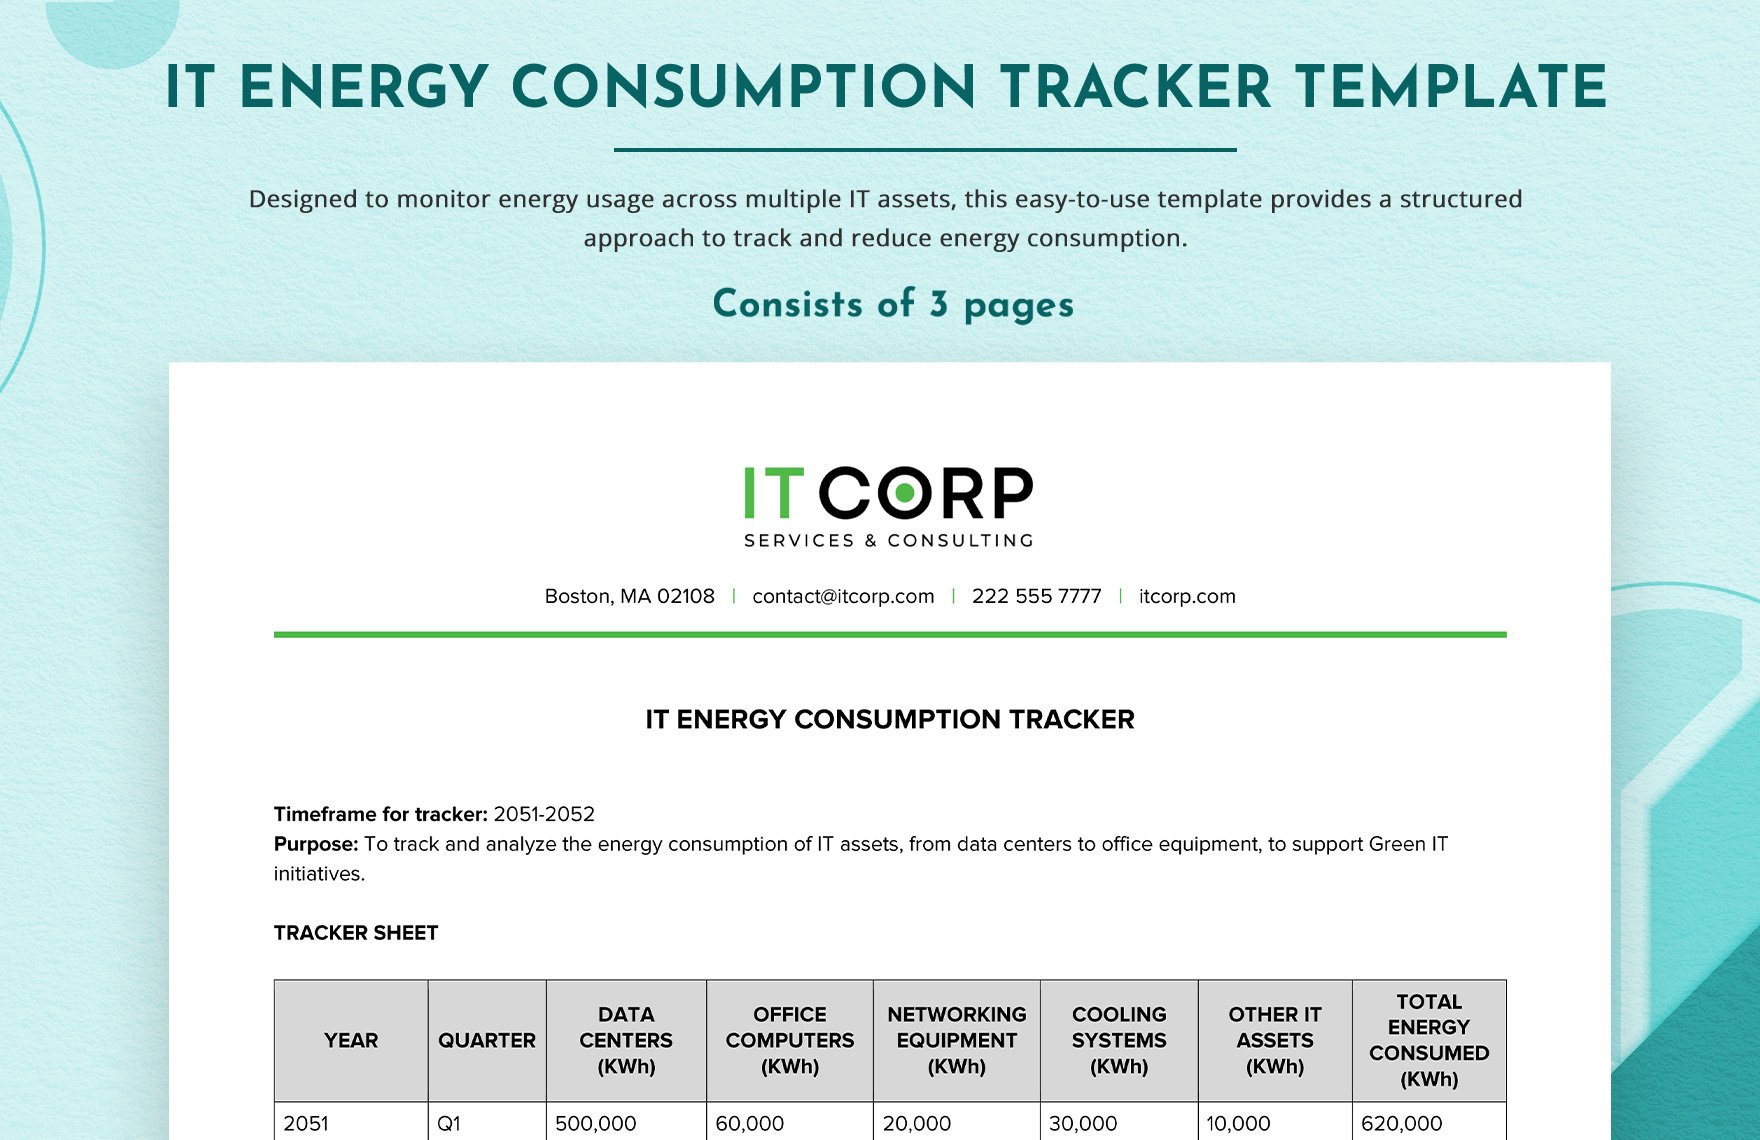 IT Energy Consumption Tracker Template